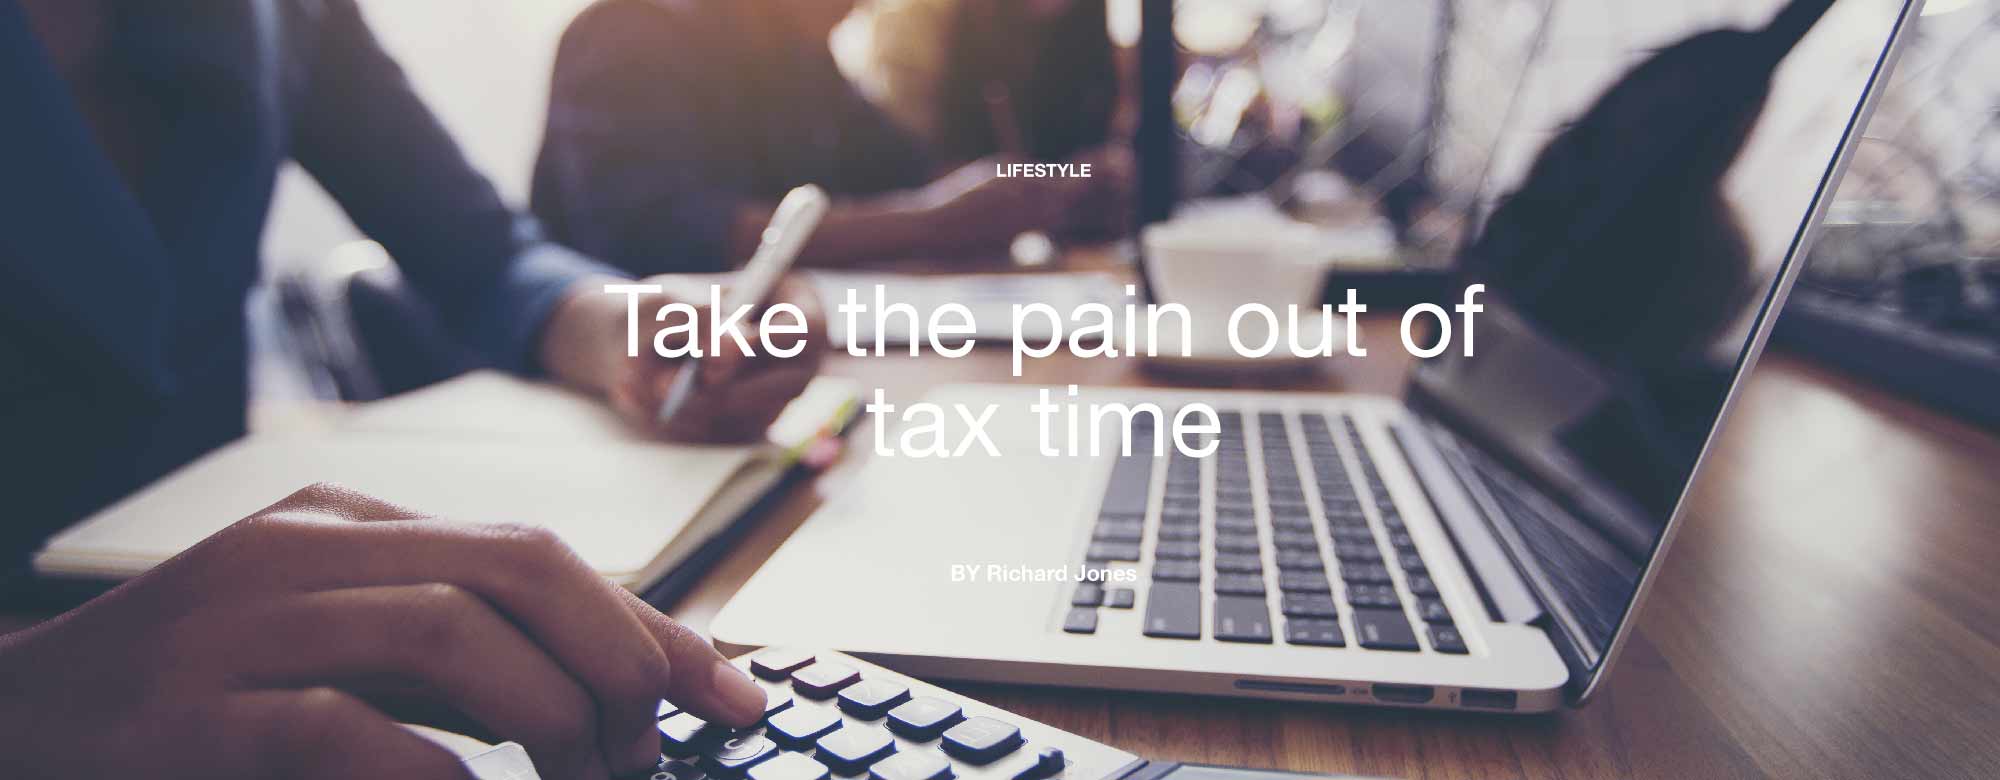 Take the pain out of tax time